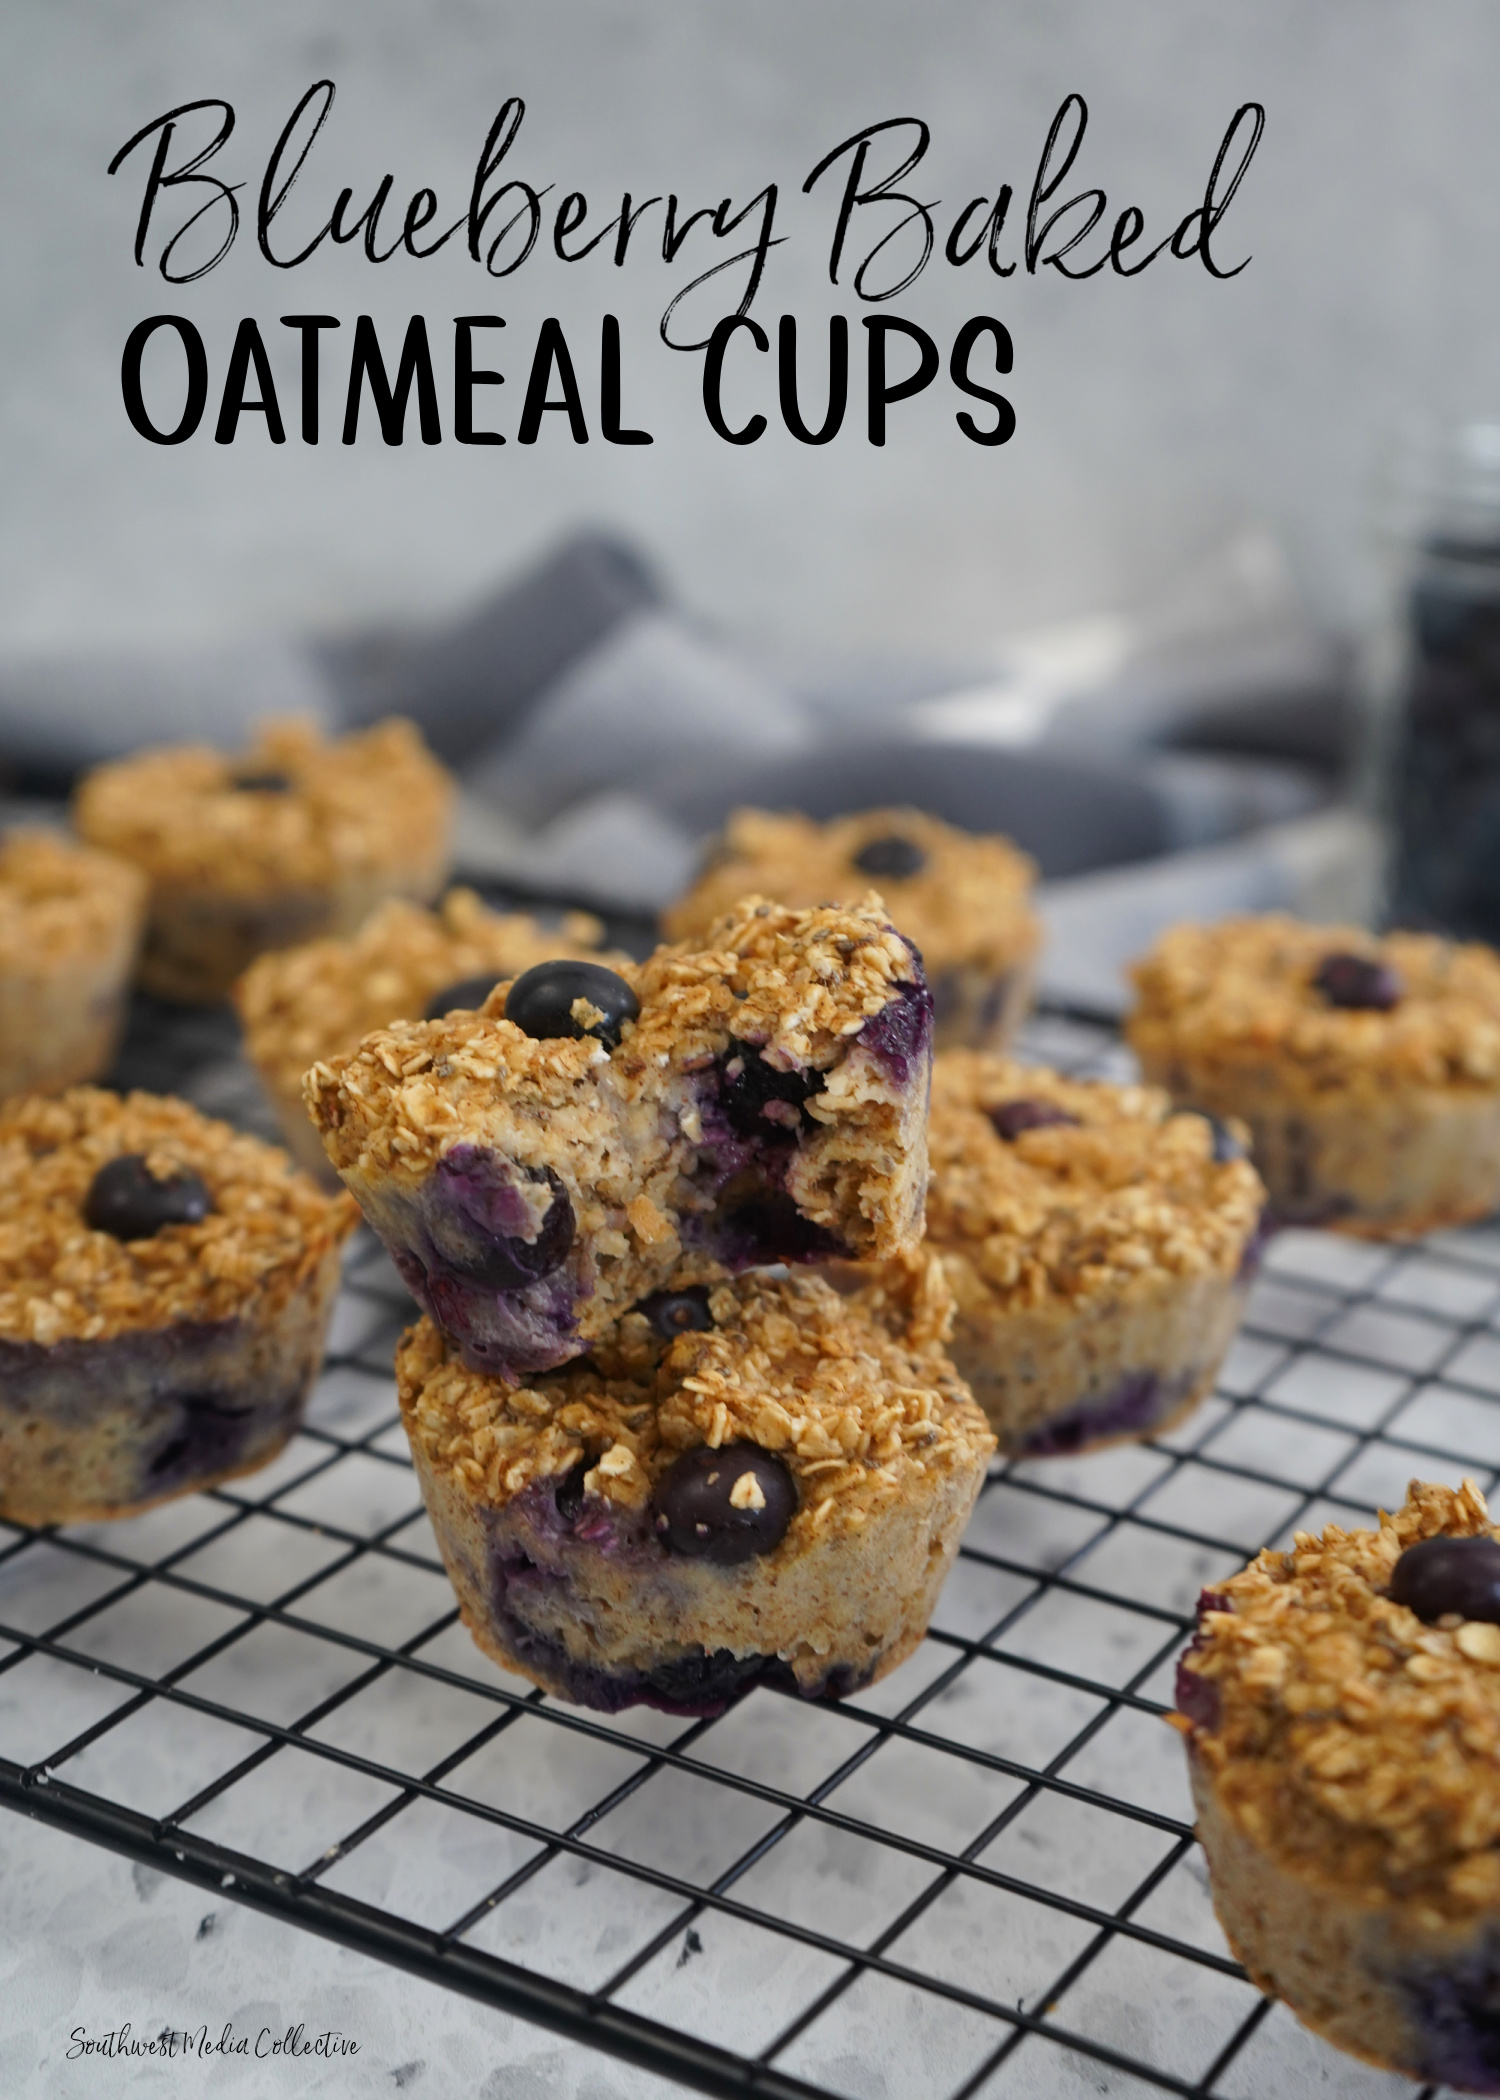 Blueberry Baked Oatmeal Cups combine simple, healthy ingredients into a quick and easy snack that's perfect for a quick breakfast!